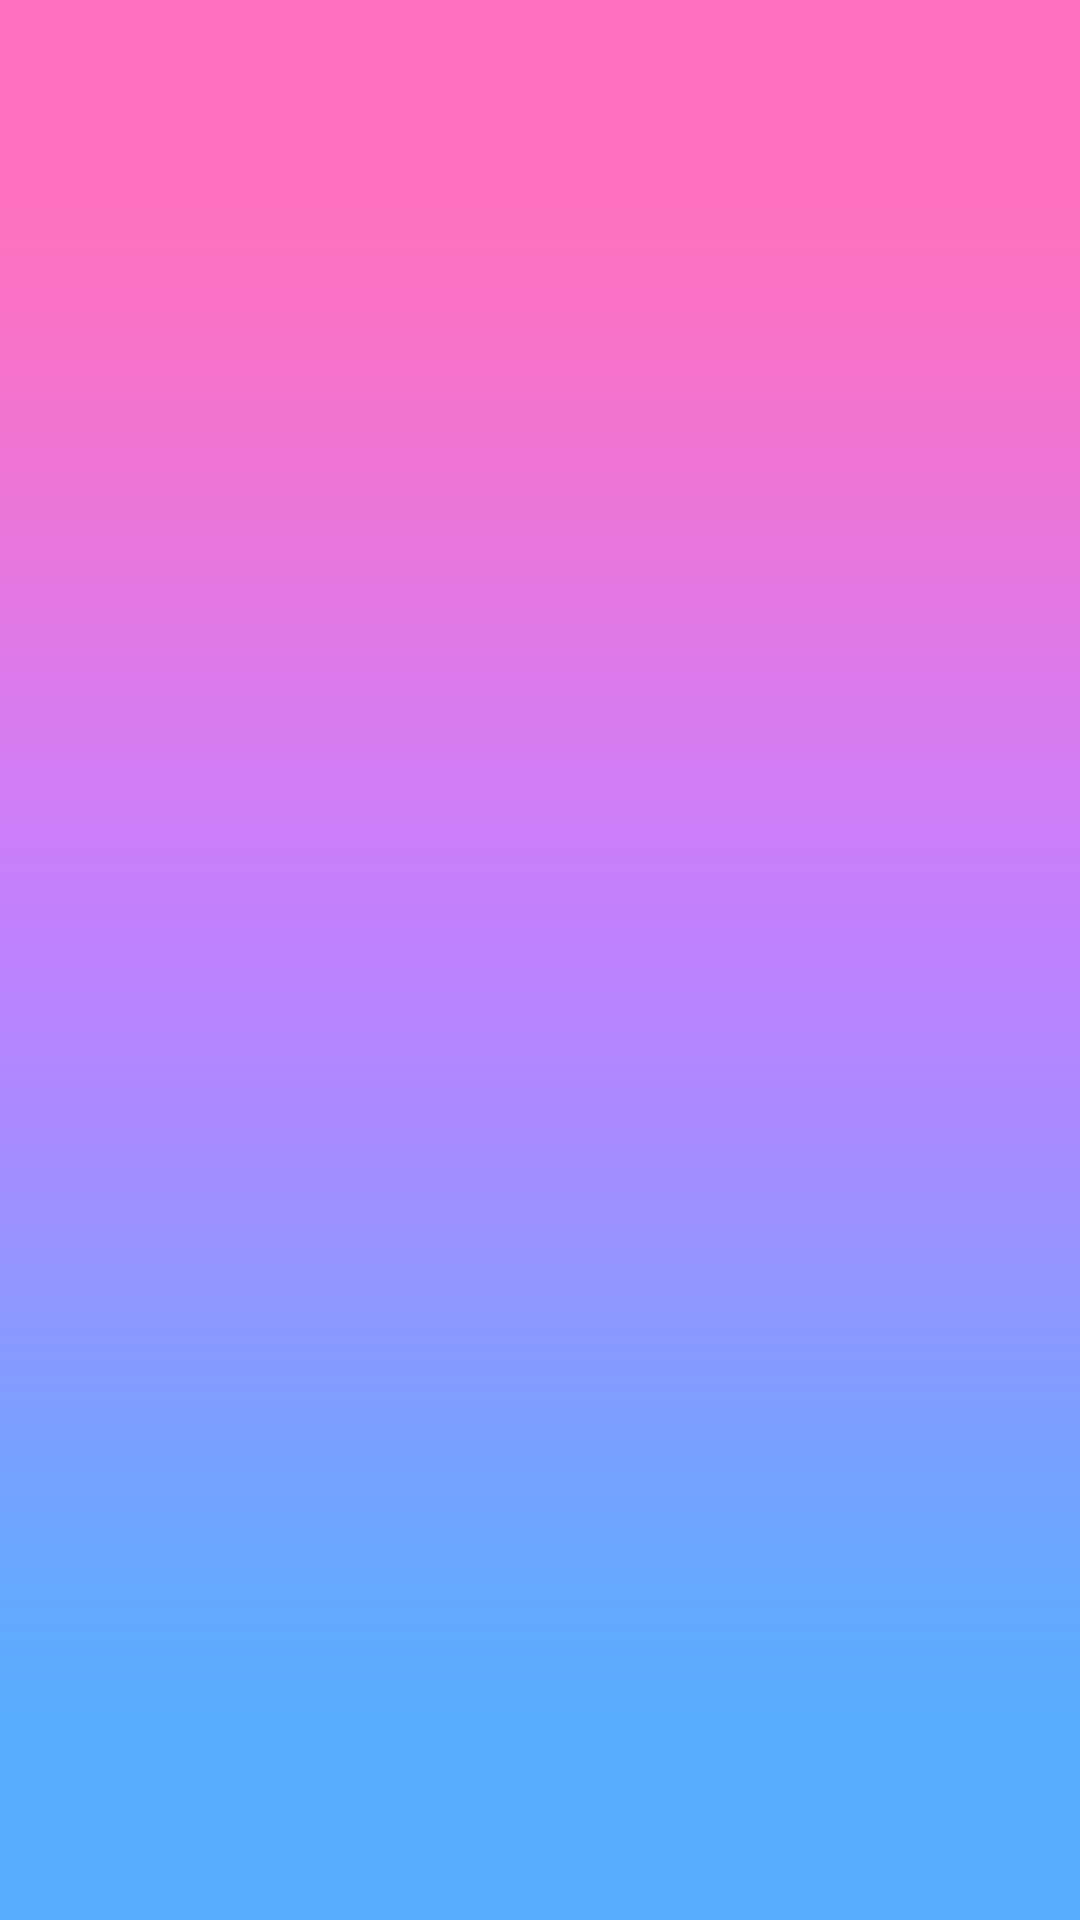 A Bright and Colorful Background in Shades of Purple and Pink